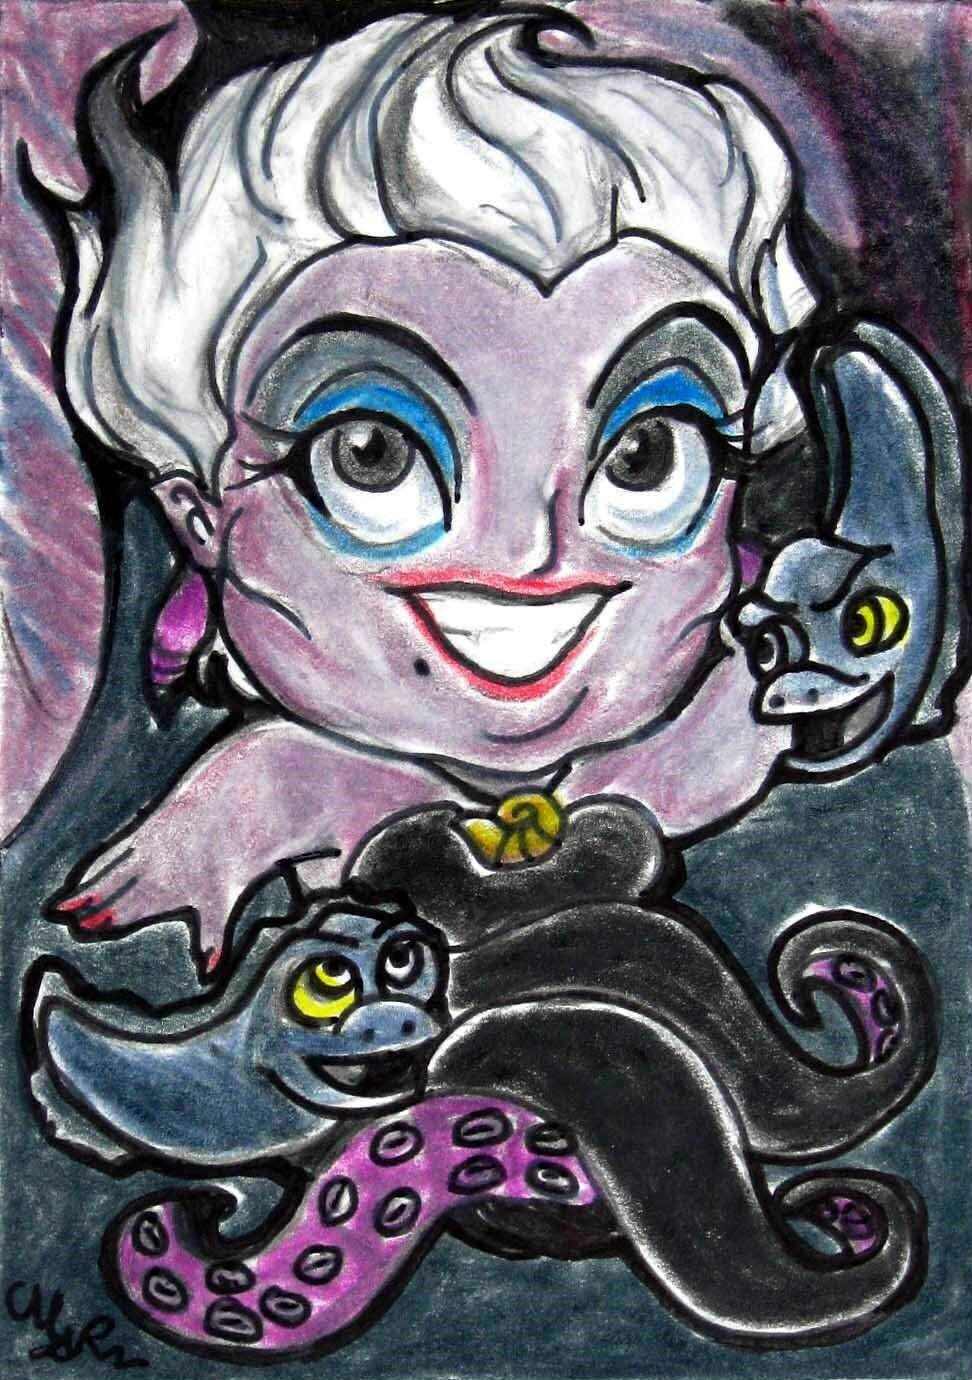 Disney The Little Mermaid Ursula Japanese Anime Art Original Sketch Card ACEO PSC 1/1 by Maia